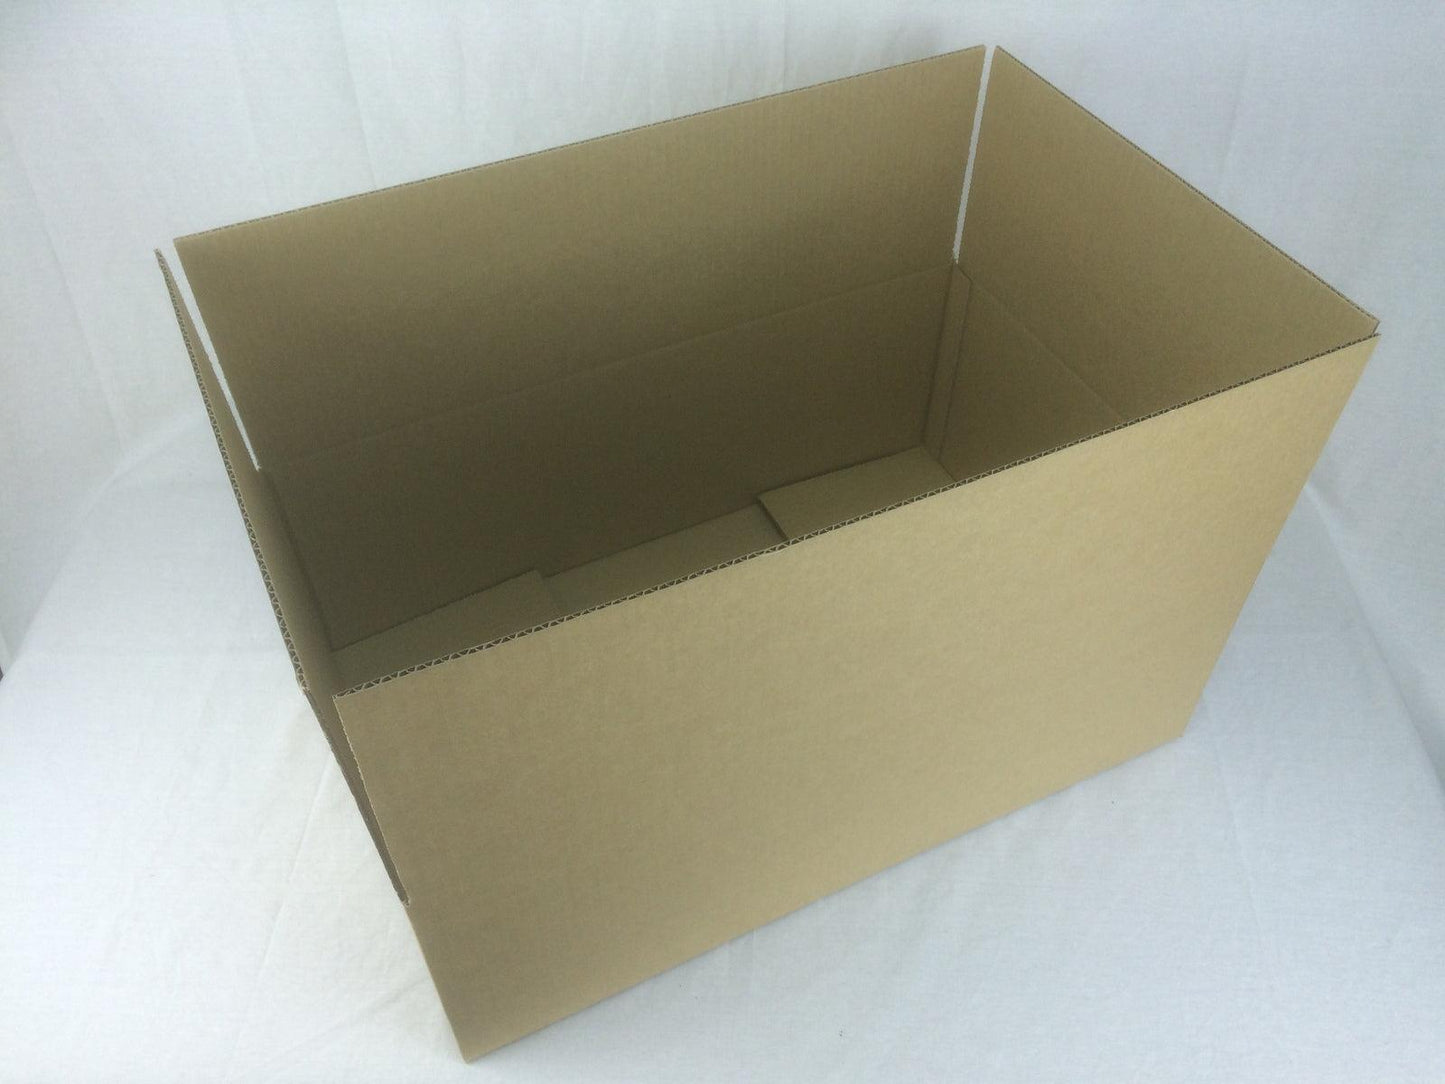 25 x Packing Moving Mailing Boxes 550 x 415 x 255 mm Cardboard Carton Box